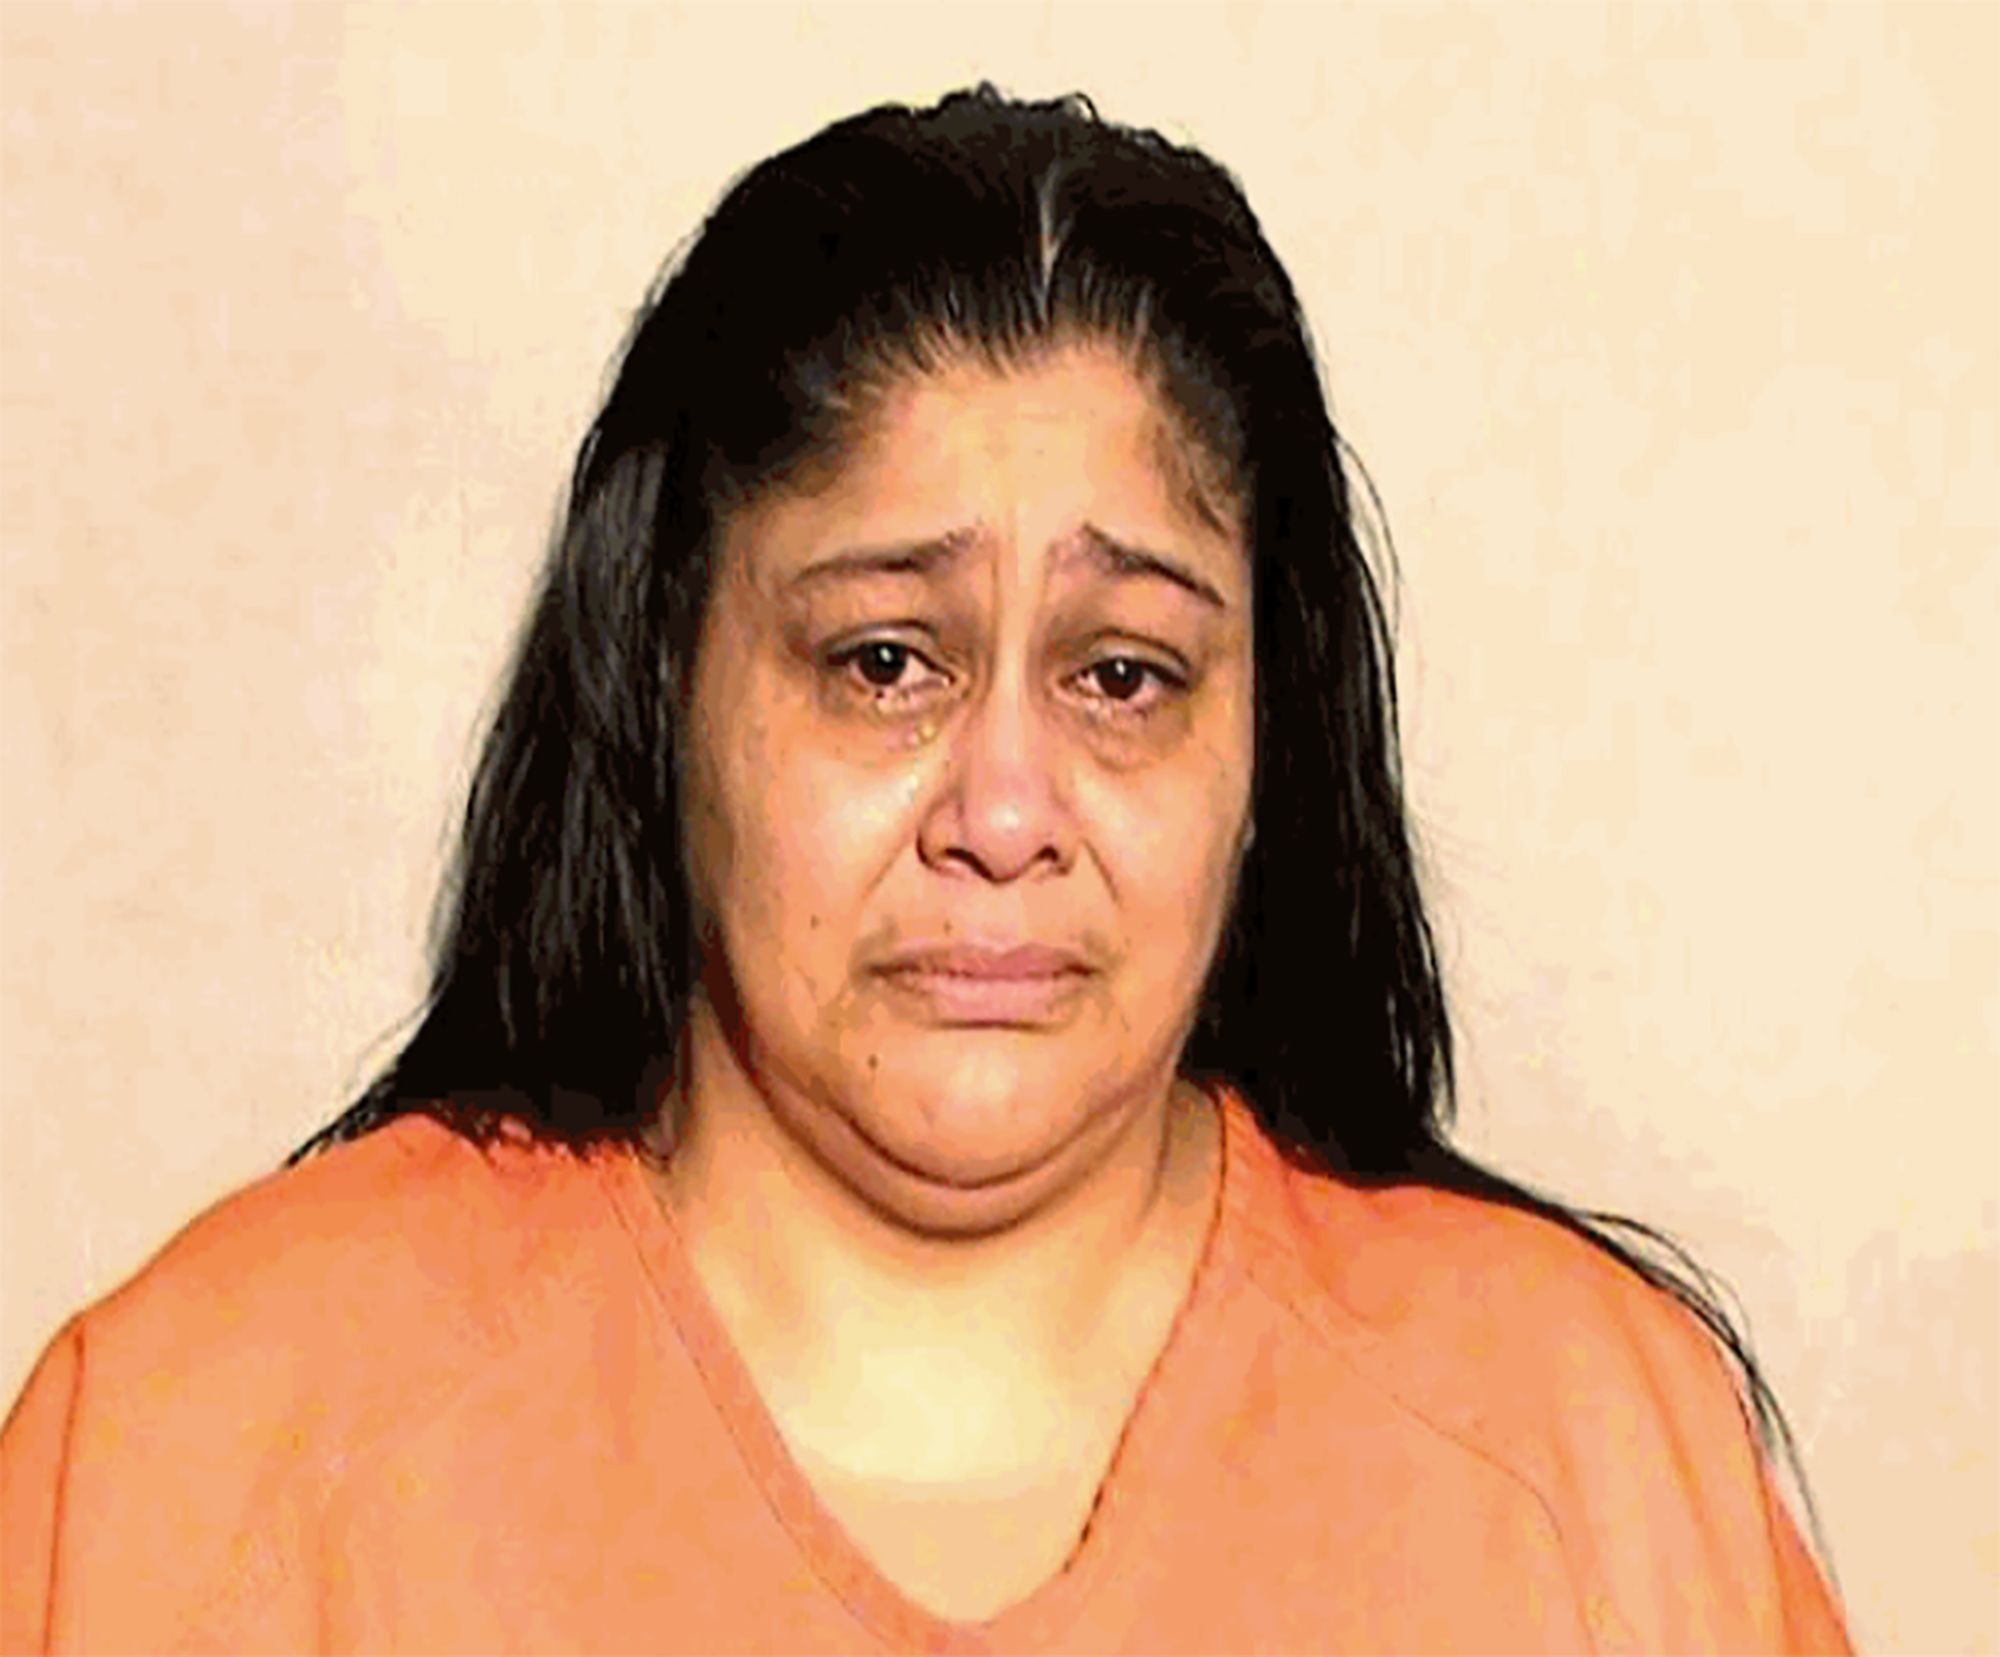 PHOTO: Yisenya Flores in a police booking photo. 